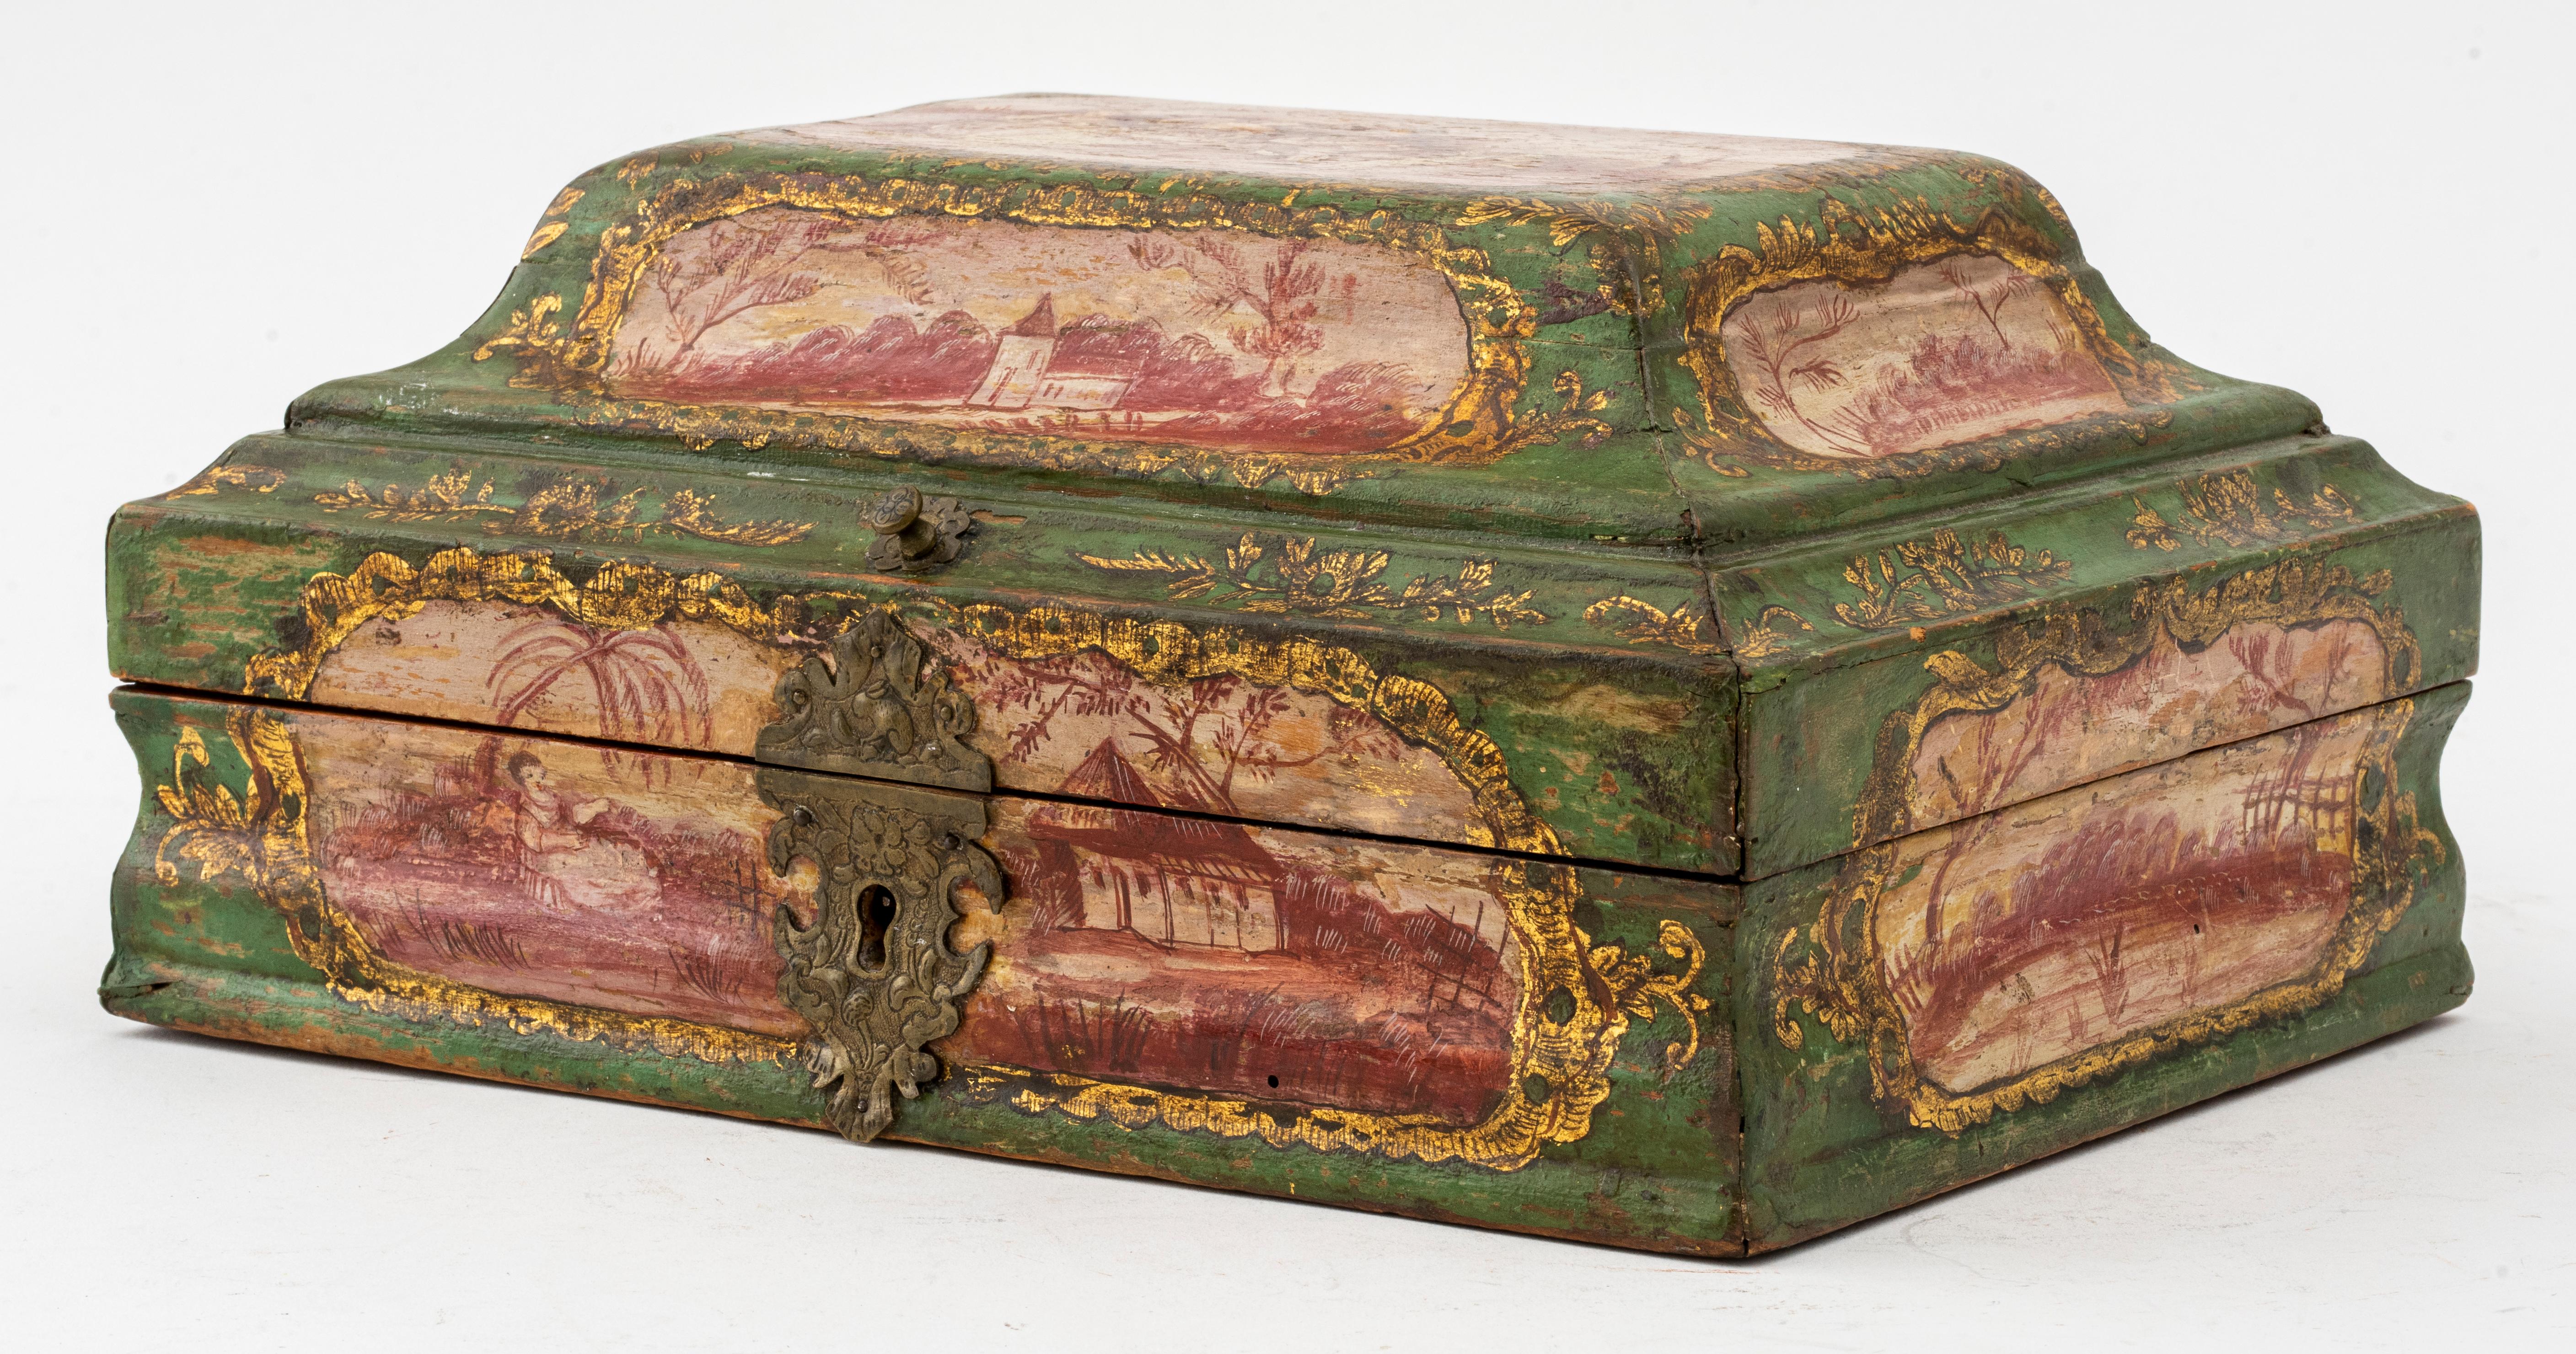 Continental Baroque manner hand-painted wooden decorative box, includes key. Measures: 5.5